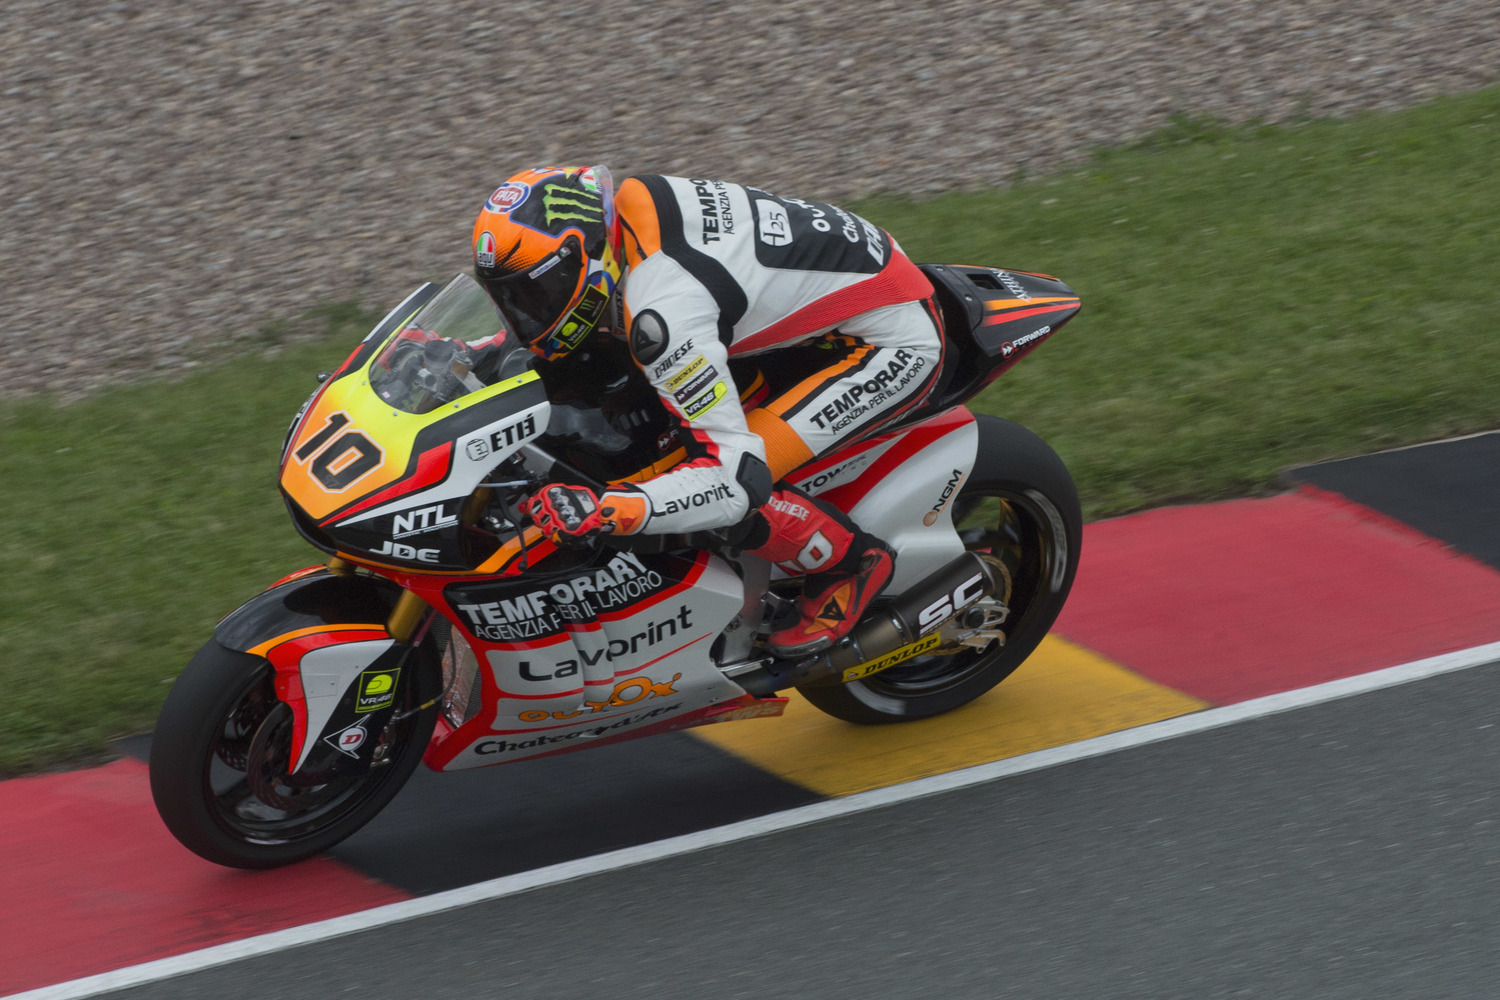 Baldassarri and Marini’s first day of practice strongly influenced by weather conditions